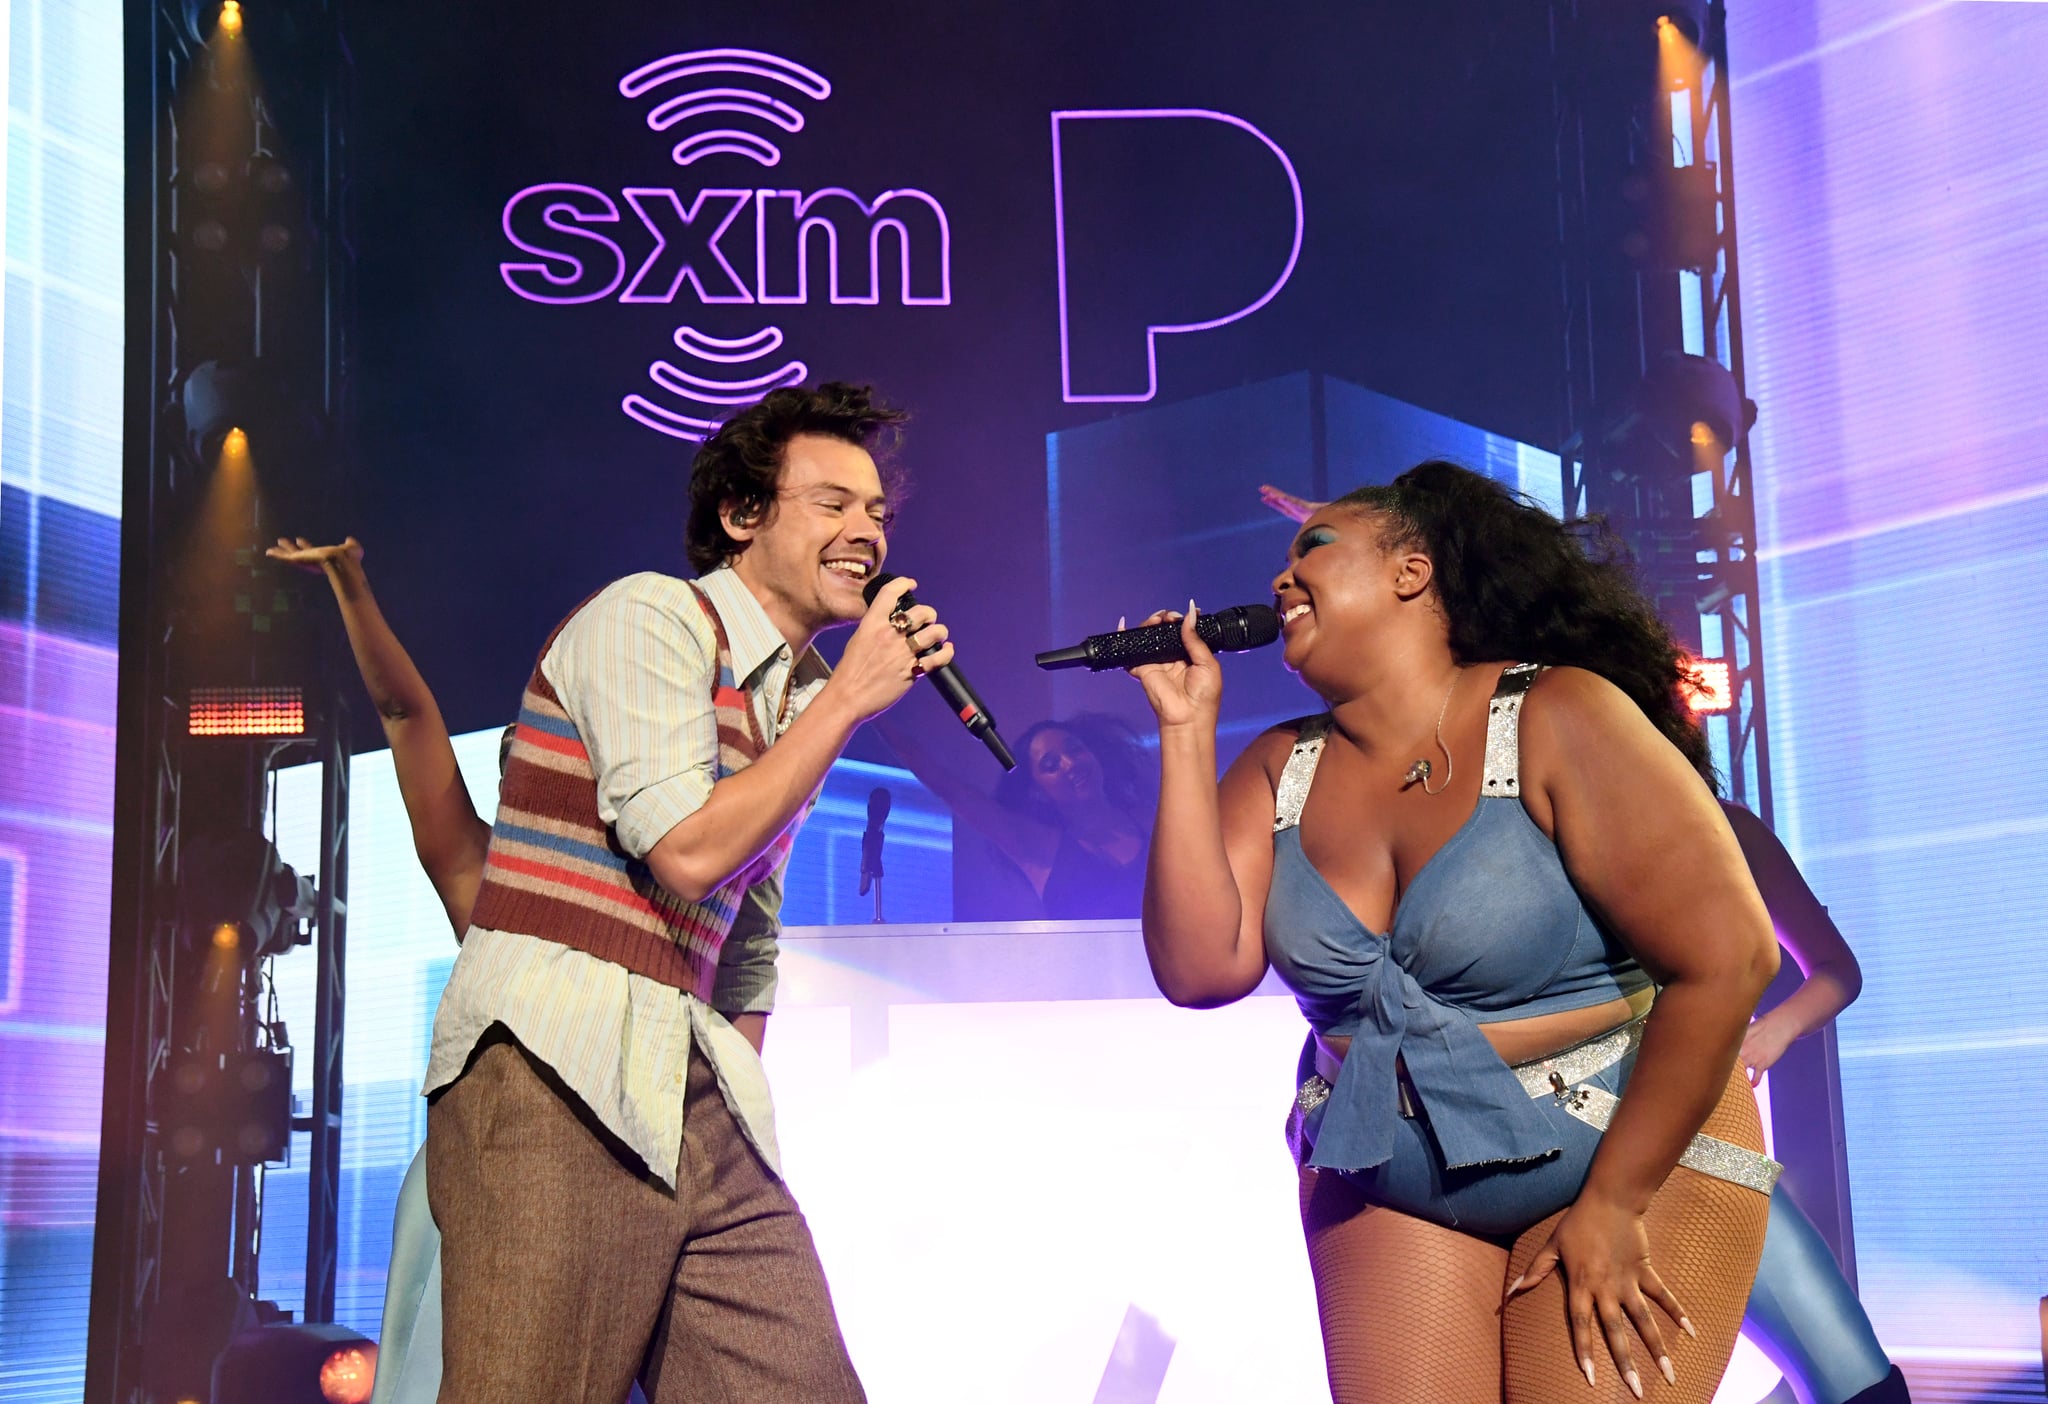 MIAMI BEACH, FLORIDA - JANUARY 30: (L-R) Harry Styles and Lizzo perform an exclusive concert for the SiriusXM and Pandora Opening Drive Super Concert Series, airing live on SiriusXM's The Heat channel, at the Fillmore Miami Beach during Super Bowl Week on January 30, 2020 in Miami Beach, Florida. (Photo by Kevin Mazur/Getty Images for Pandora)